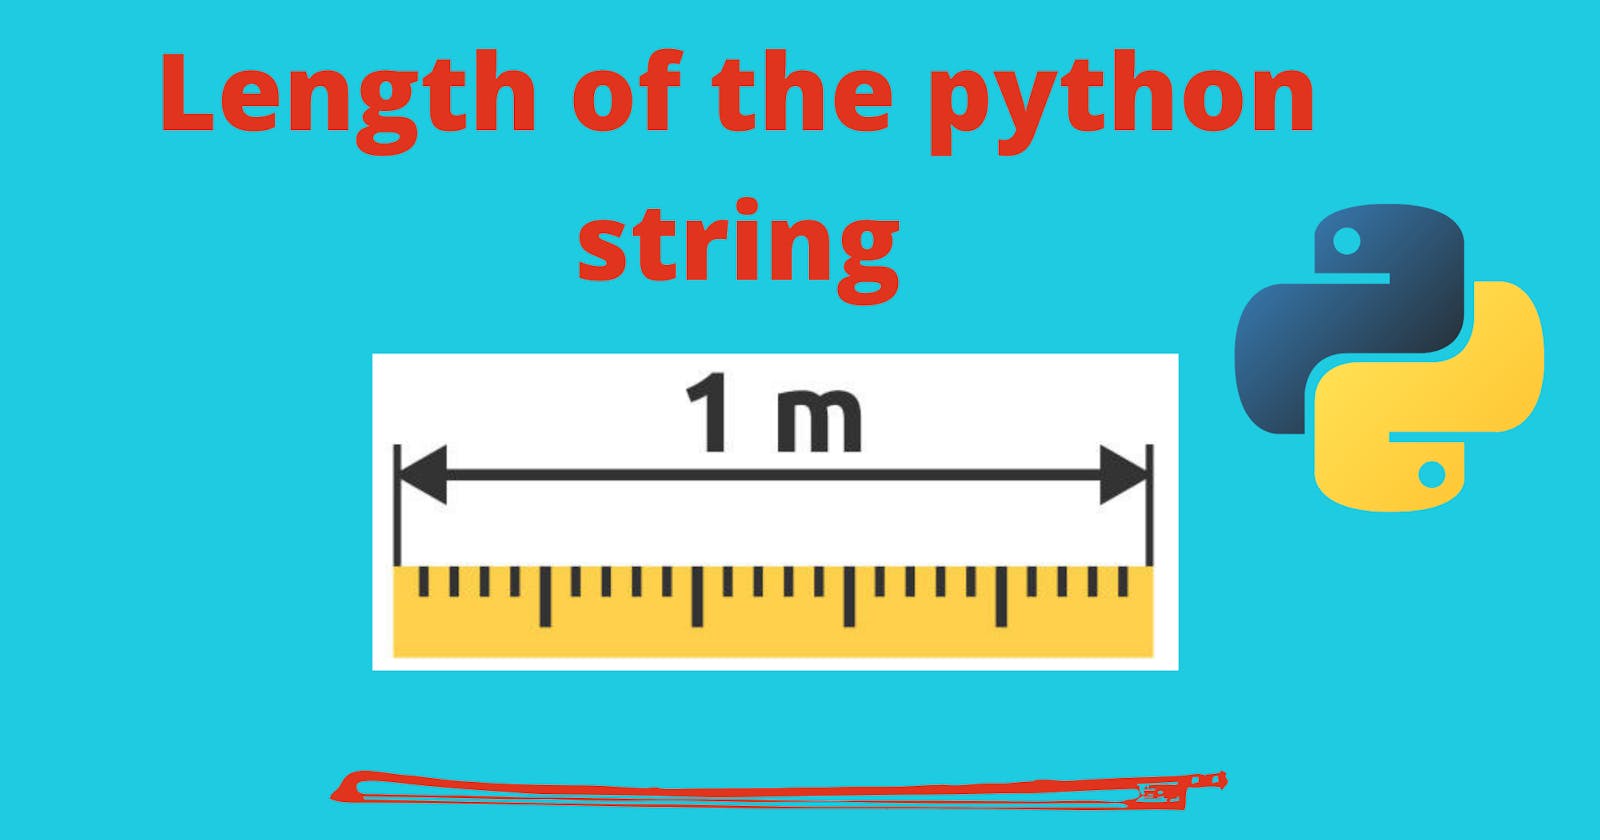 How to grab the length of the python string?